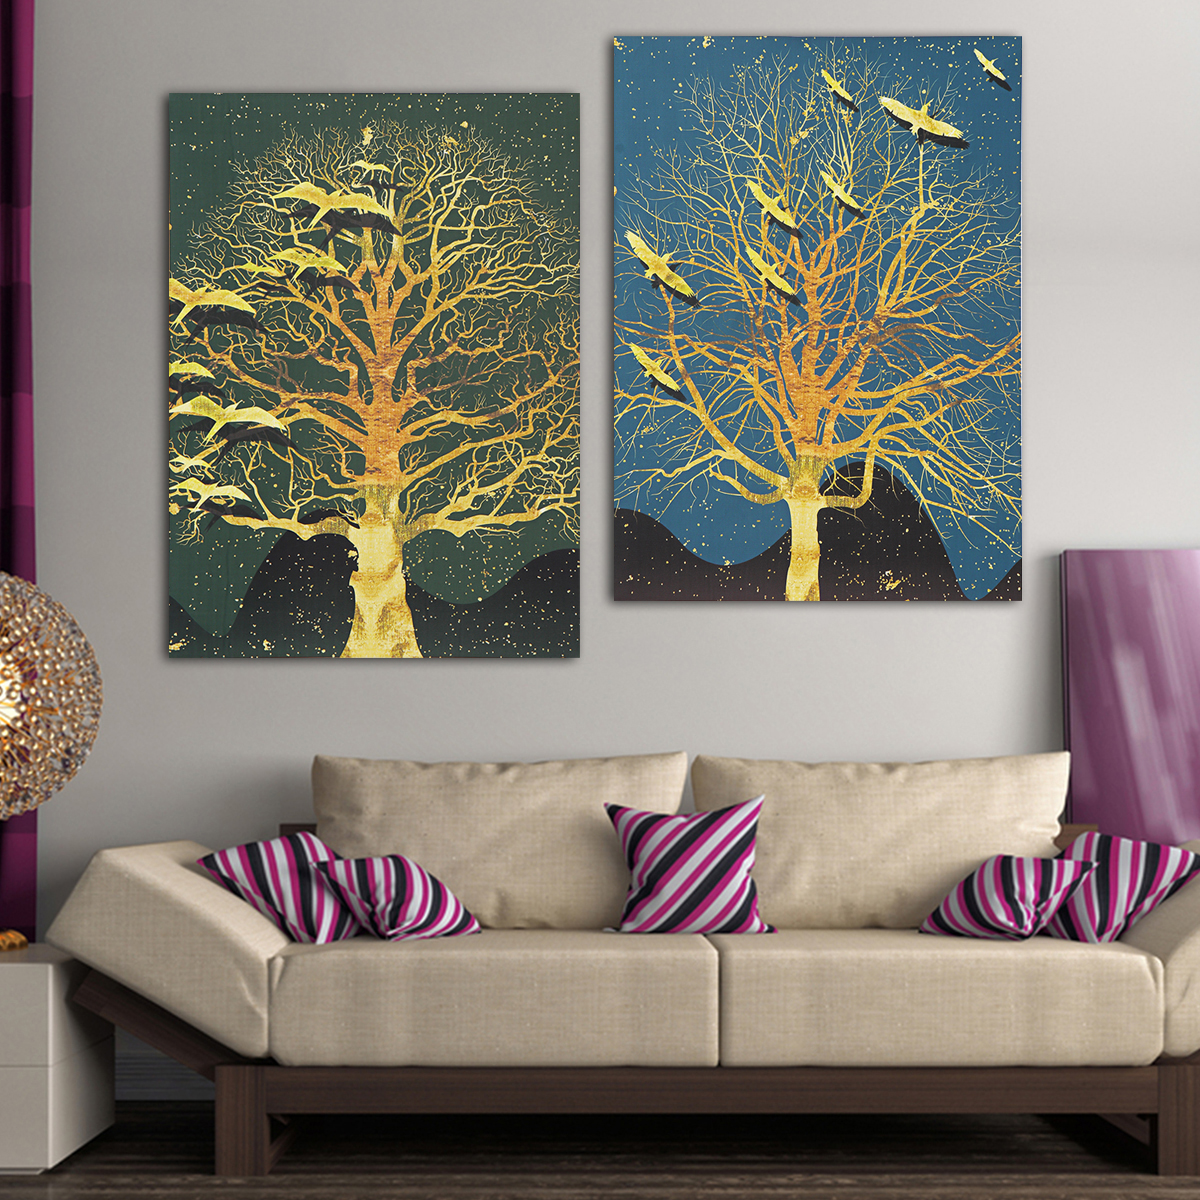 2Pcs-Modern-Tree-Canvas-Print-Paintings-Wall-Art-Unframed-Picture-Home-Decor-1430564-2